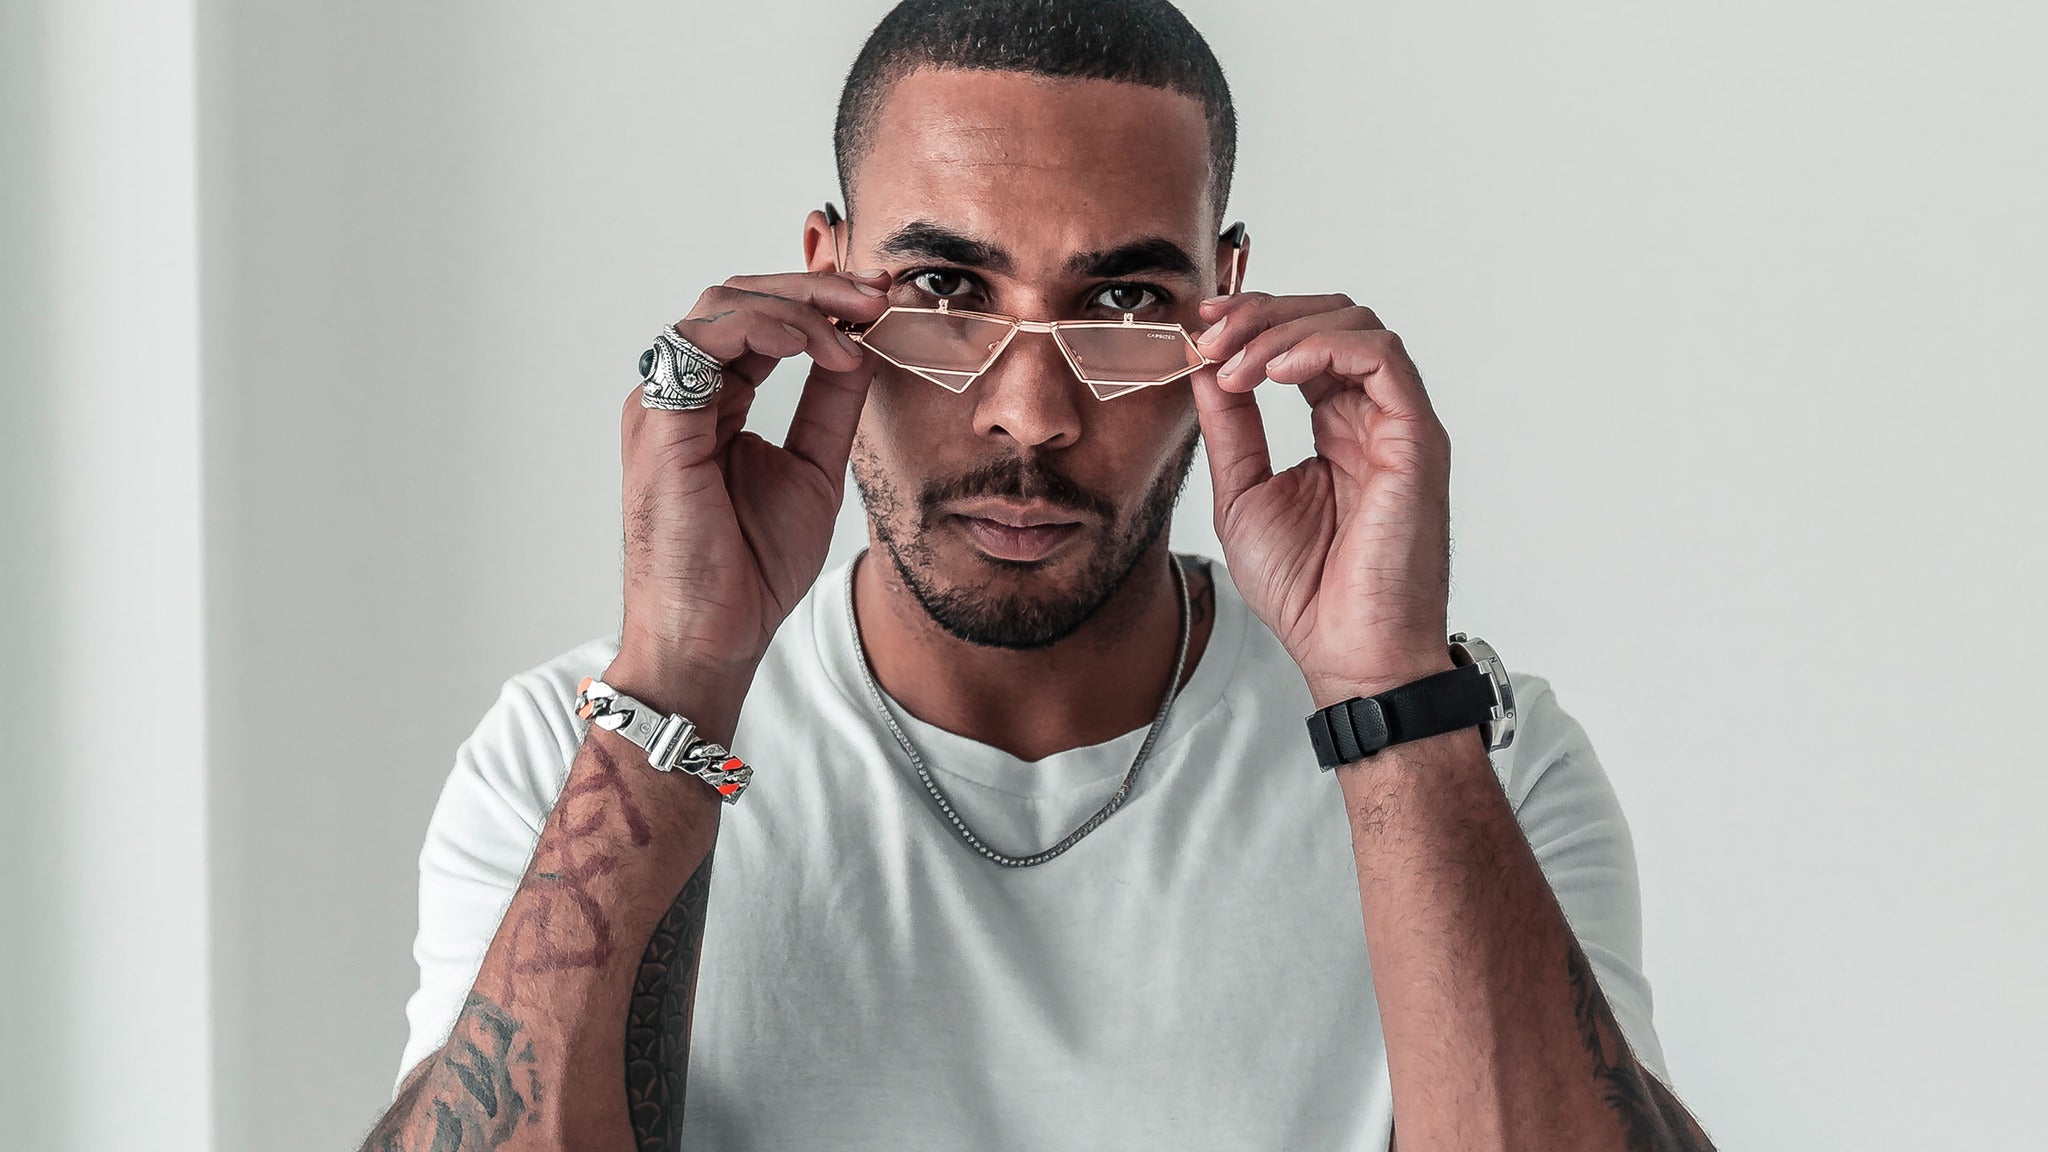 TroyBoi in Toronto promo photo for Me + 3 Promotional  presale offer code